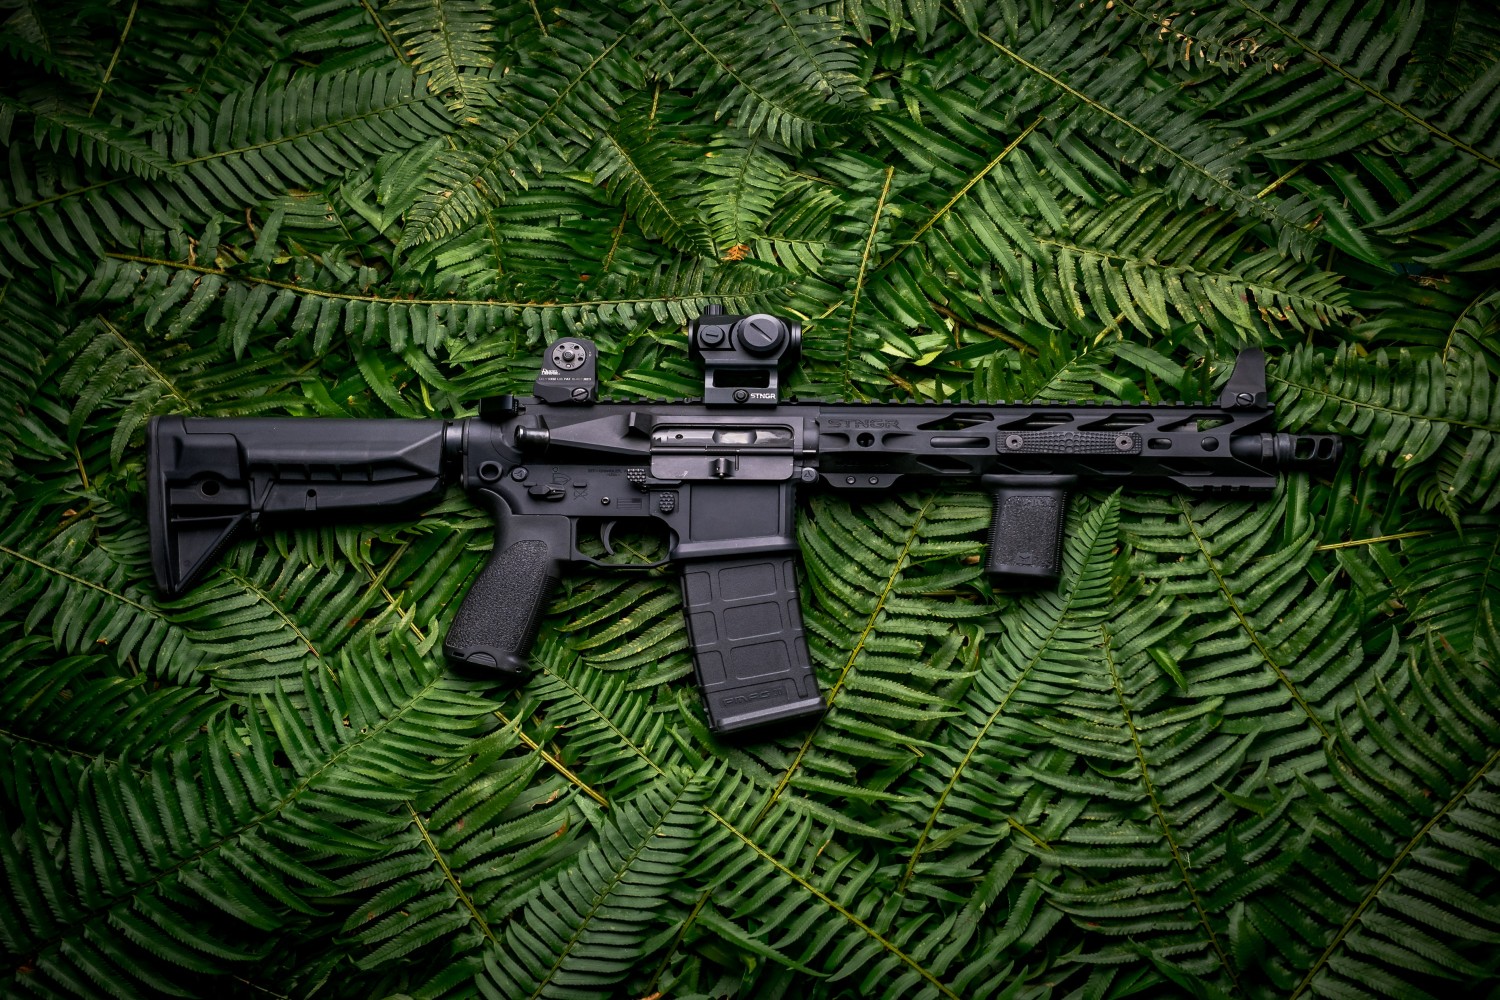  AR-15 on pile of green leaves